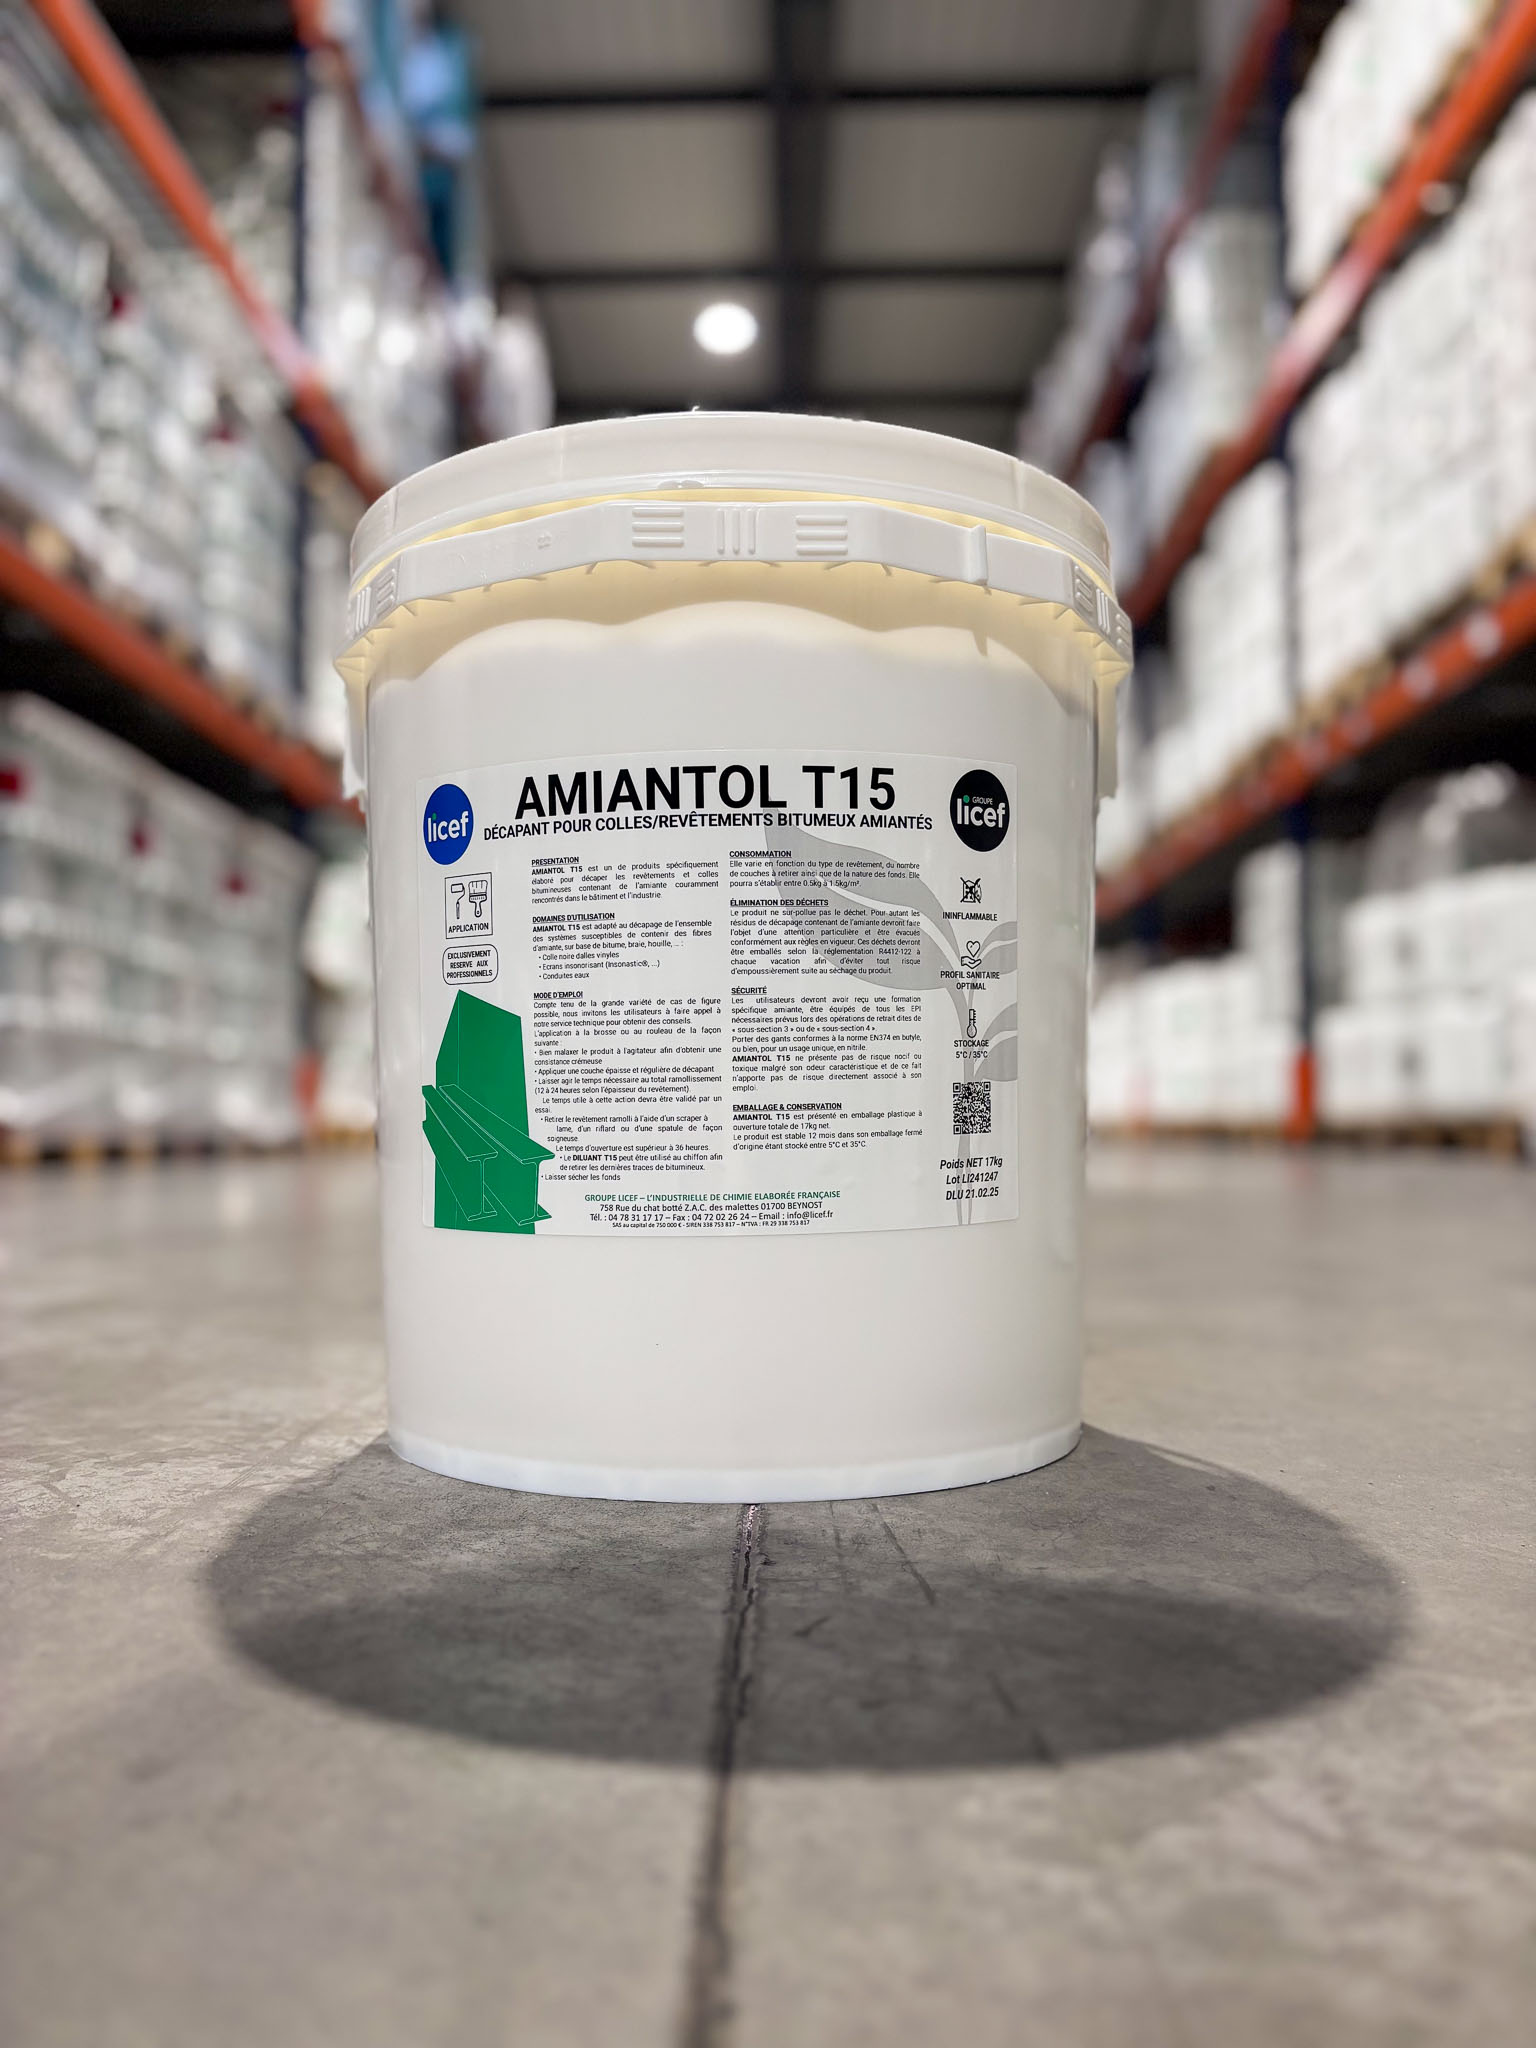 AMIANTOL T15 – Gamme LICEF